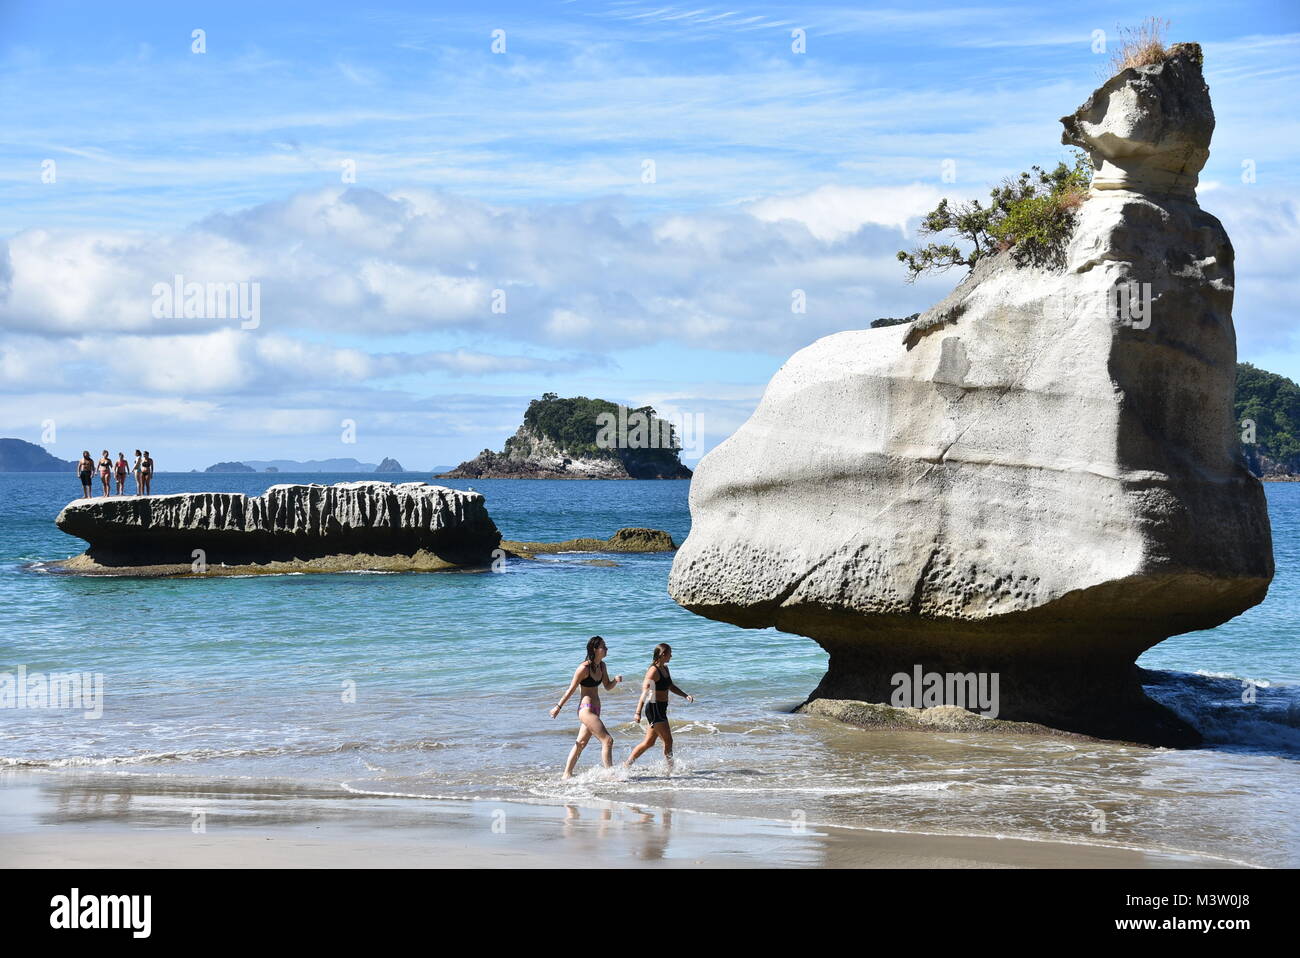 People walking on the beach and jumping from a cliff to the sea. Stock Photo